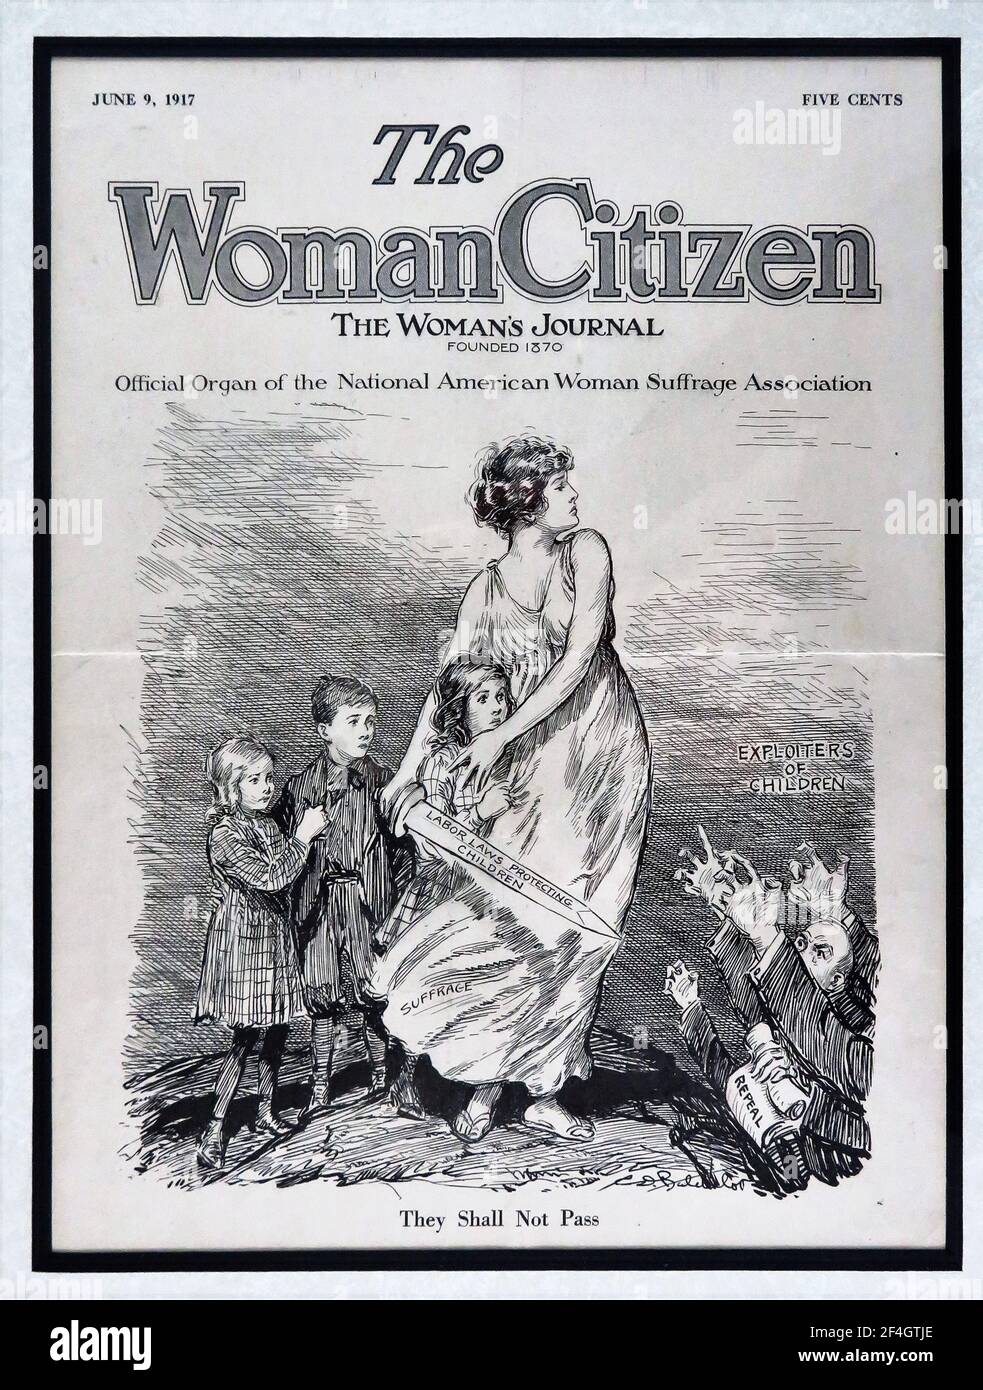 Cover Illustration von The Woman Citizen, with a personification of Suffrage as a woman with a Deword, protecting the rights of child Labourers, veröffentlicht von der National American Woman Suffrage Association for the American Market, 9. Juni 1917. Fotografie von Emilia van Beugen. () Stockfoto